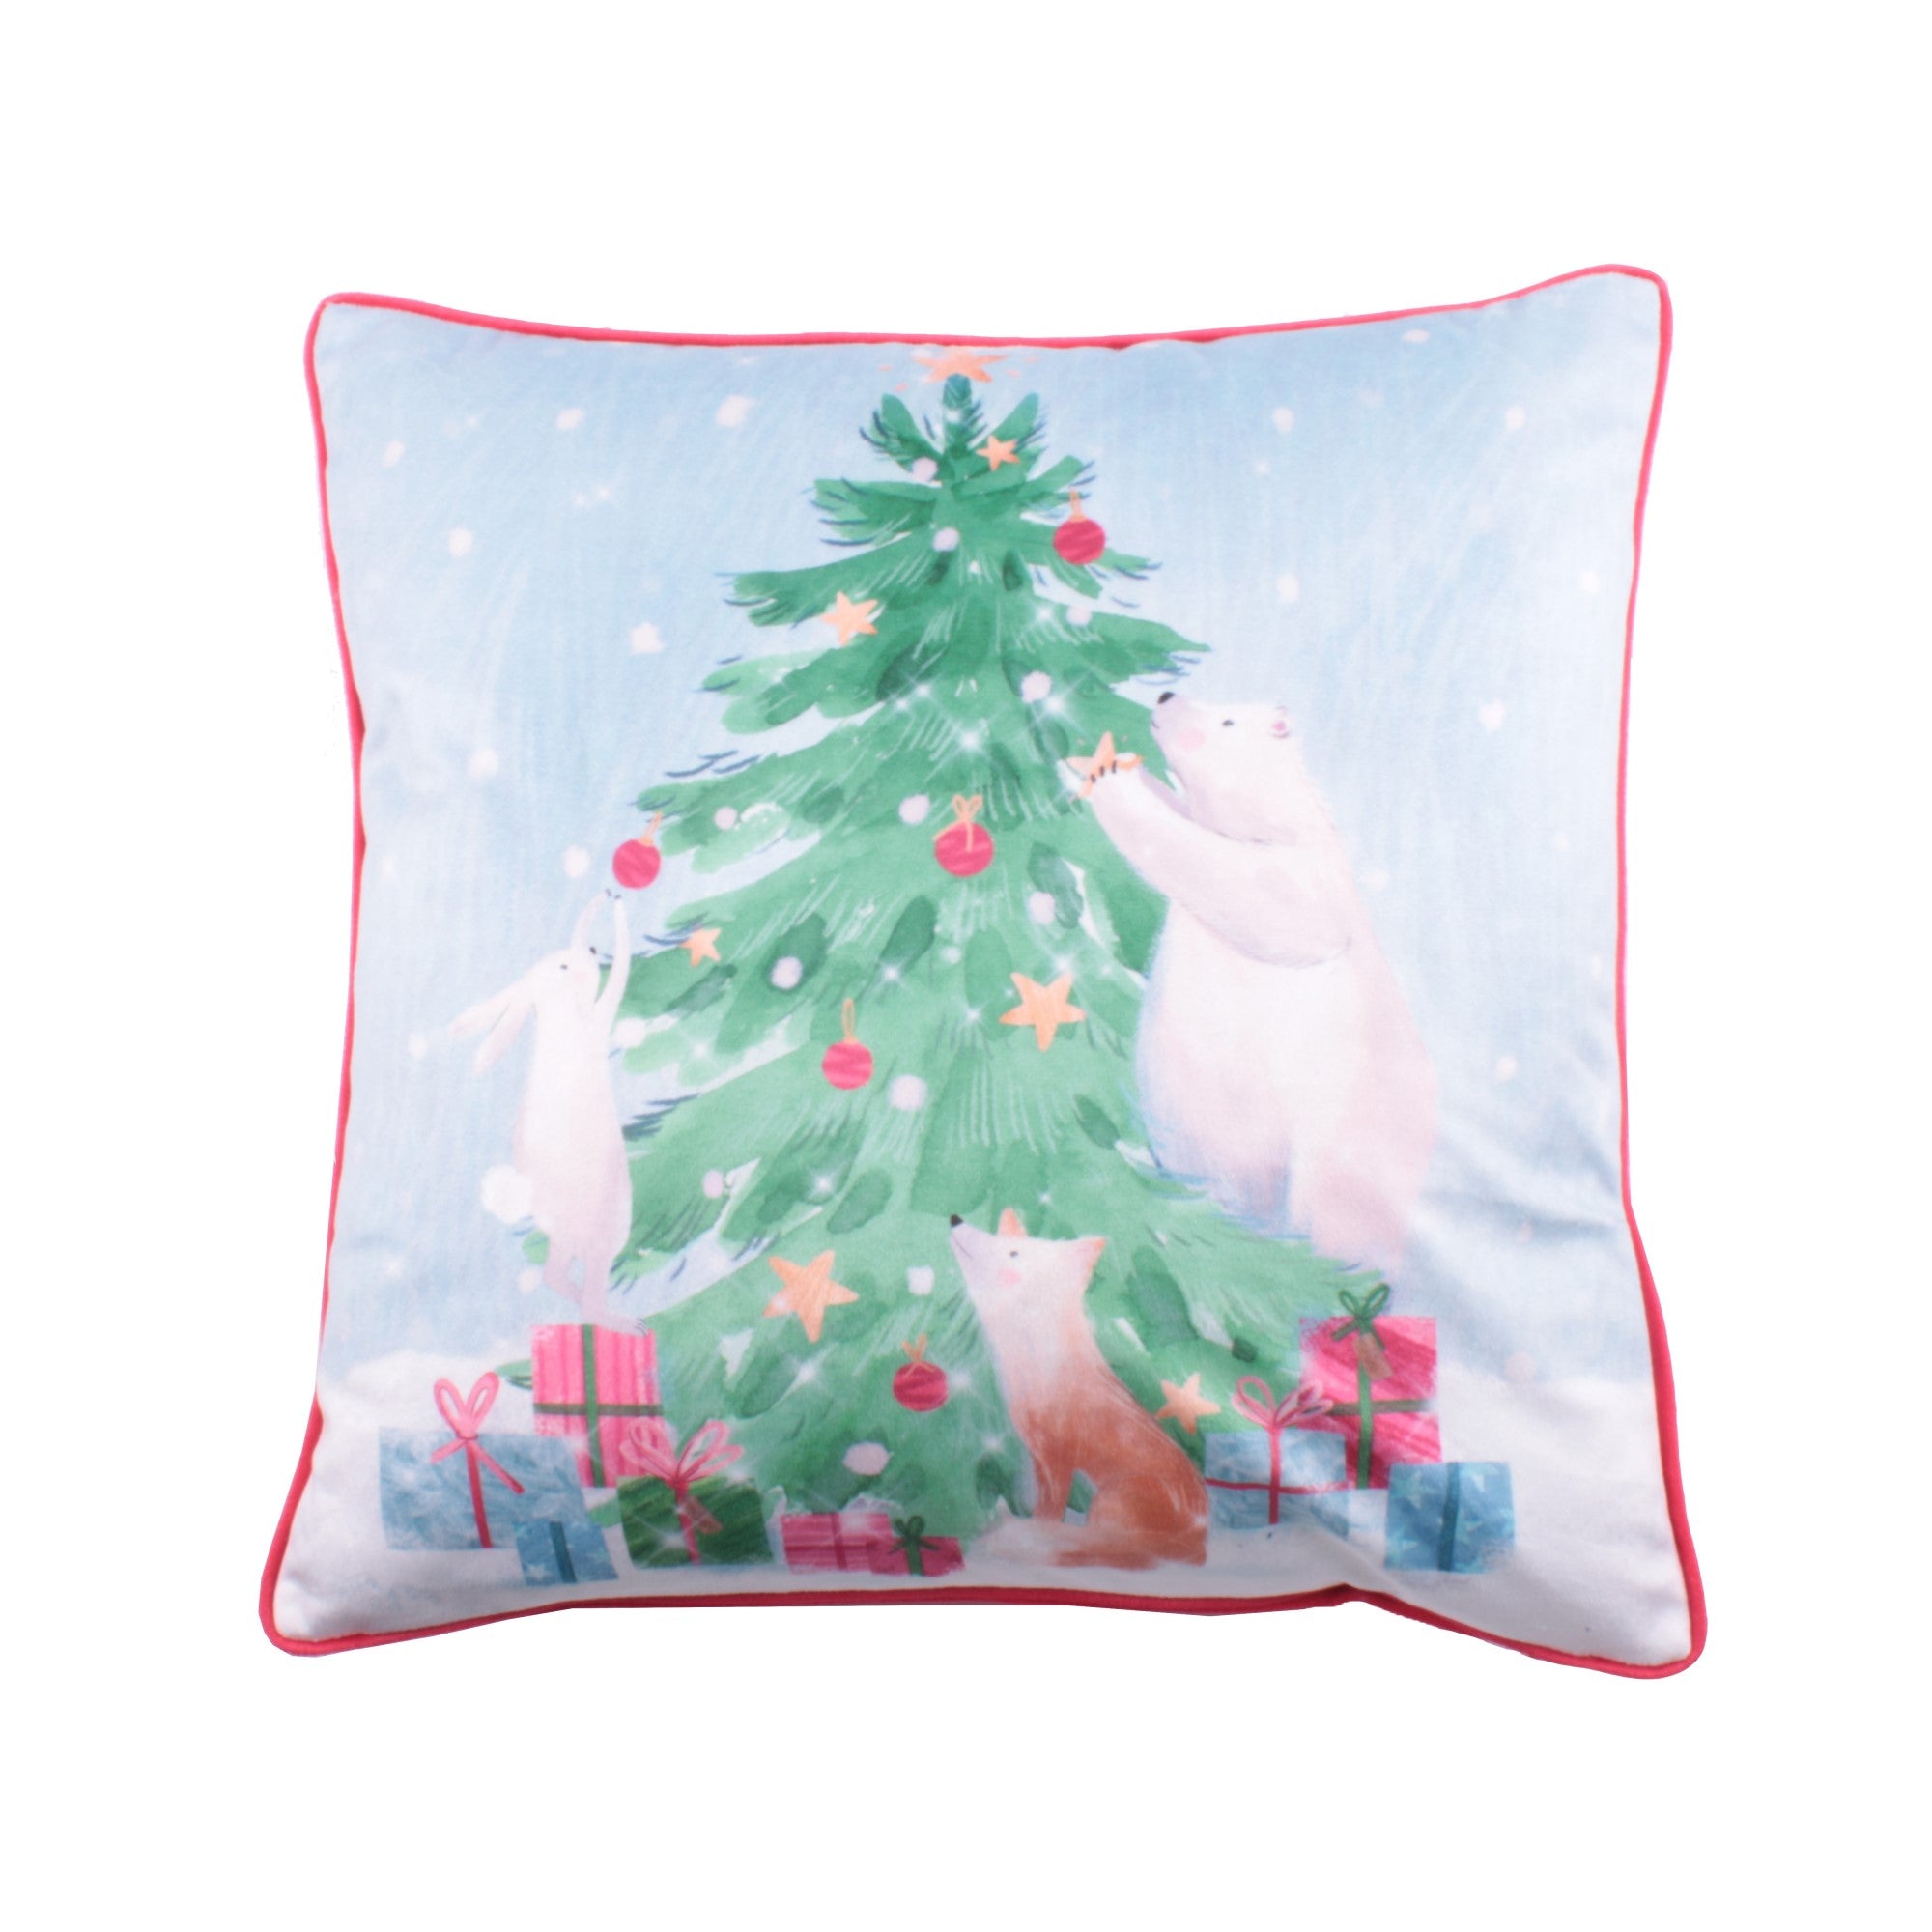 Cushion Cover Winter Friends by Fusion in Green